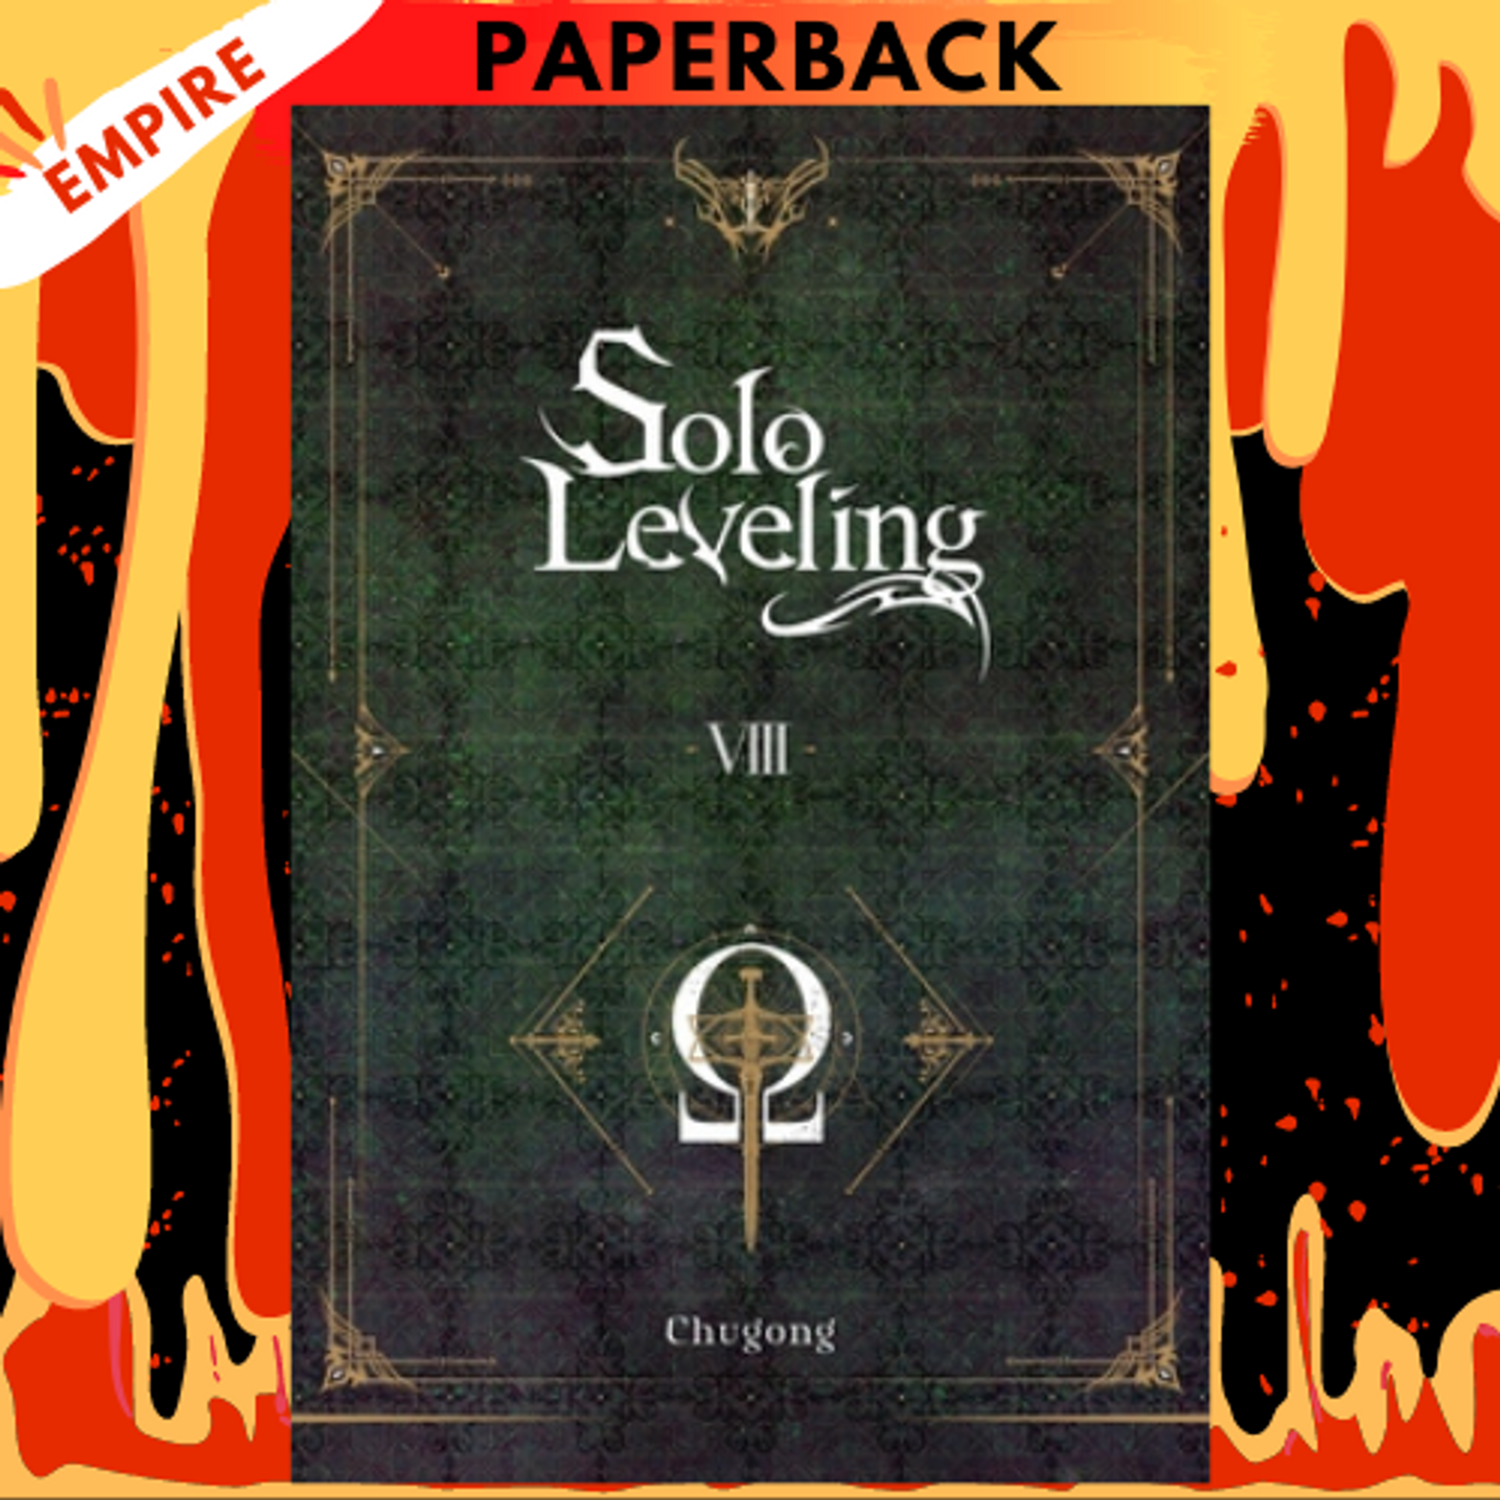 Solo Leveling, Vol. 8 (novel) by Chugong, Paperback